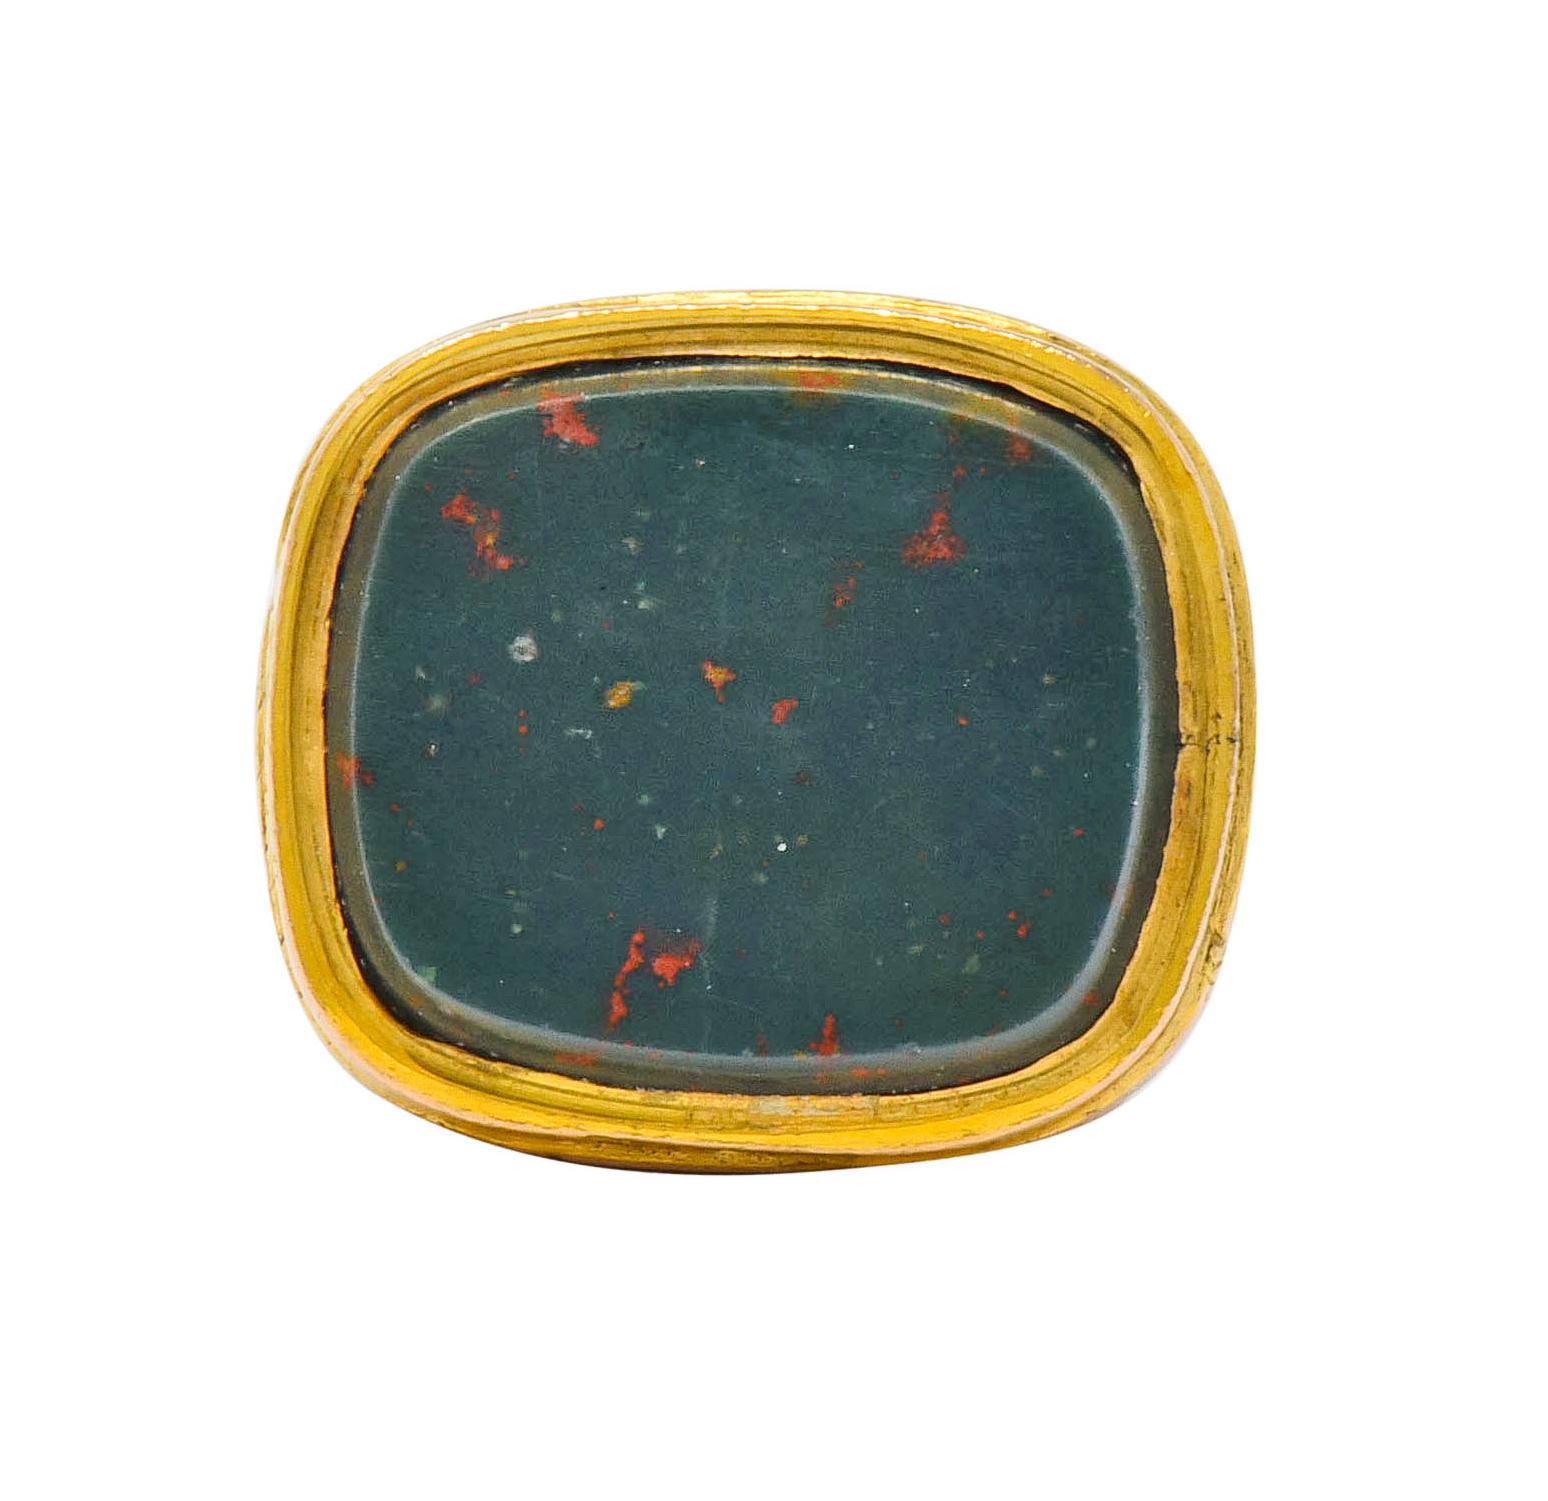 Fob designed with deeply engraved scrolled details and highly rendered dimensional forms

Bezel set with a cushion cut tablet of polished bloodstone; translucent and a very slightly bluish-green color with bright red flecks

Completed by jump ring